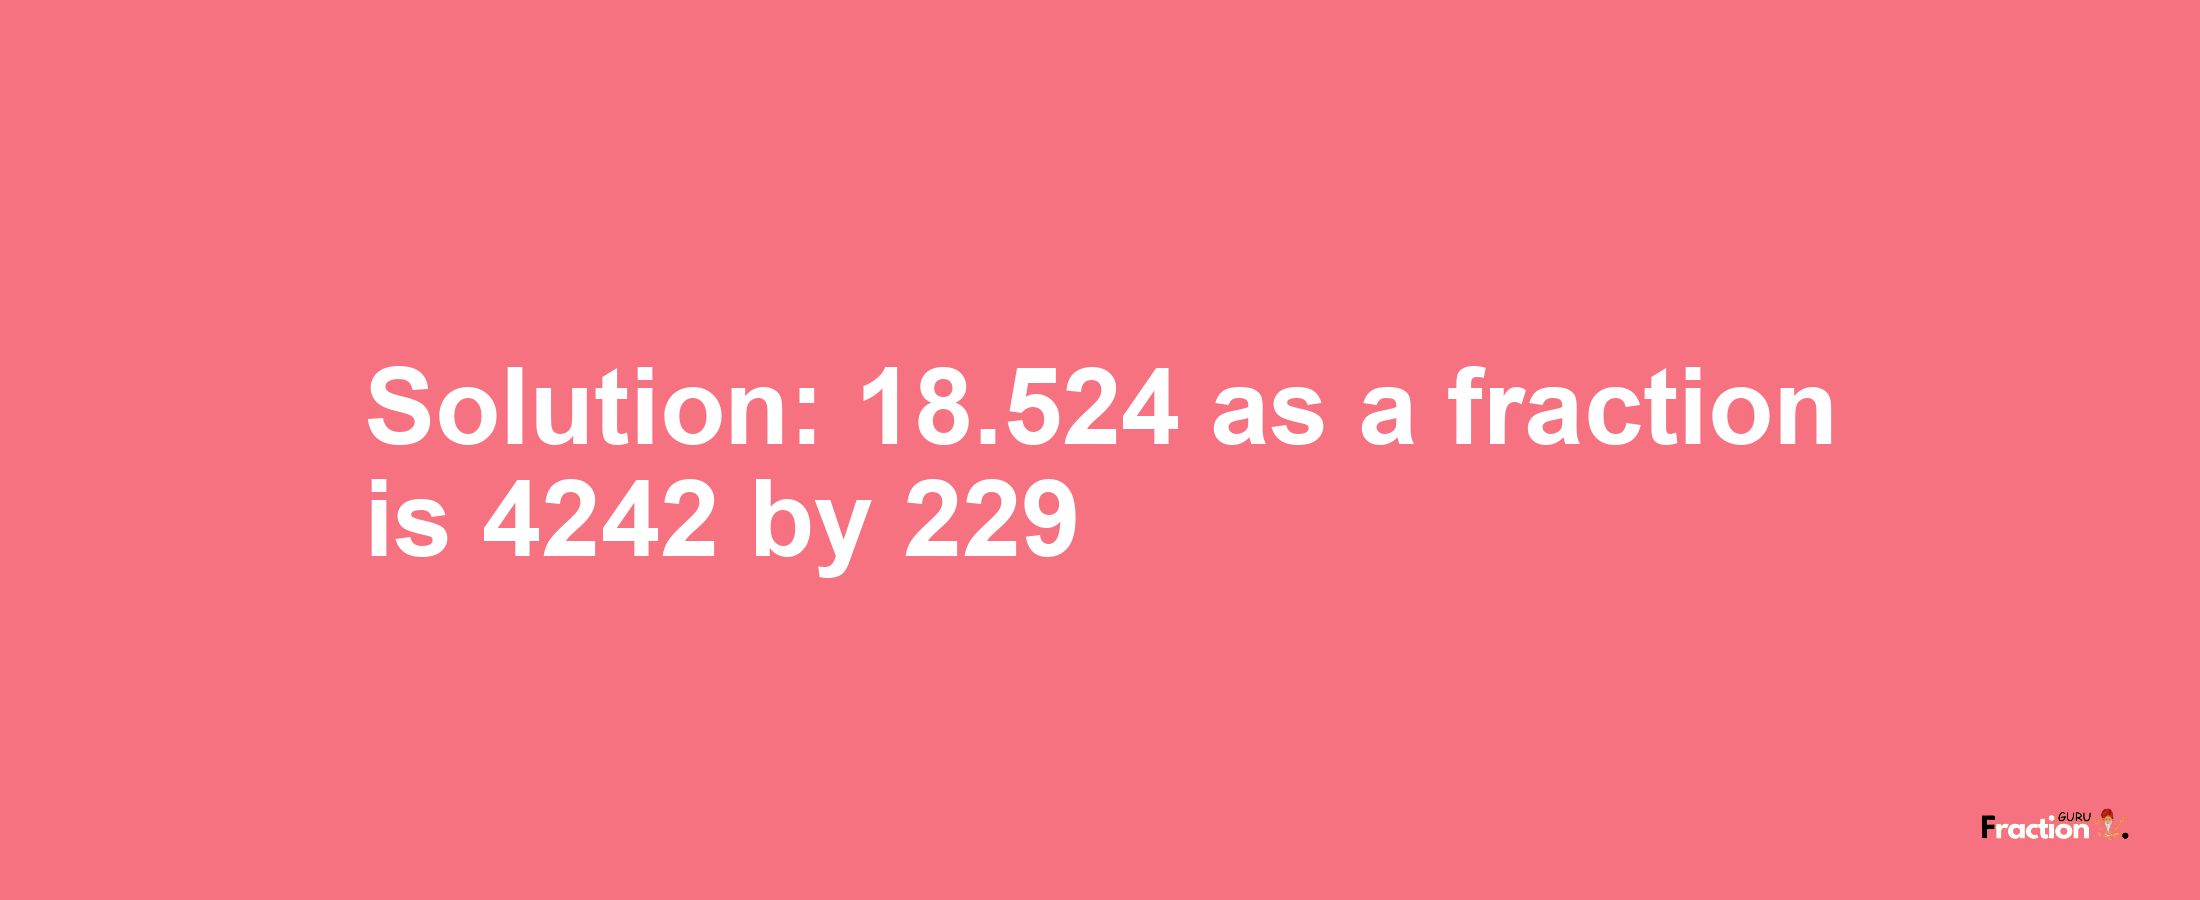 Solution:18.524 as a fraction is 4242/229